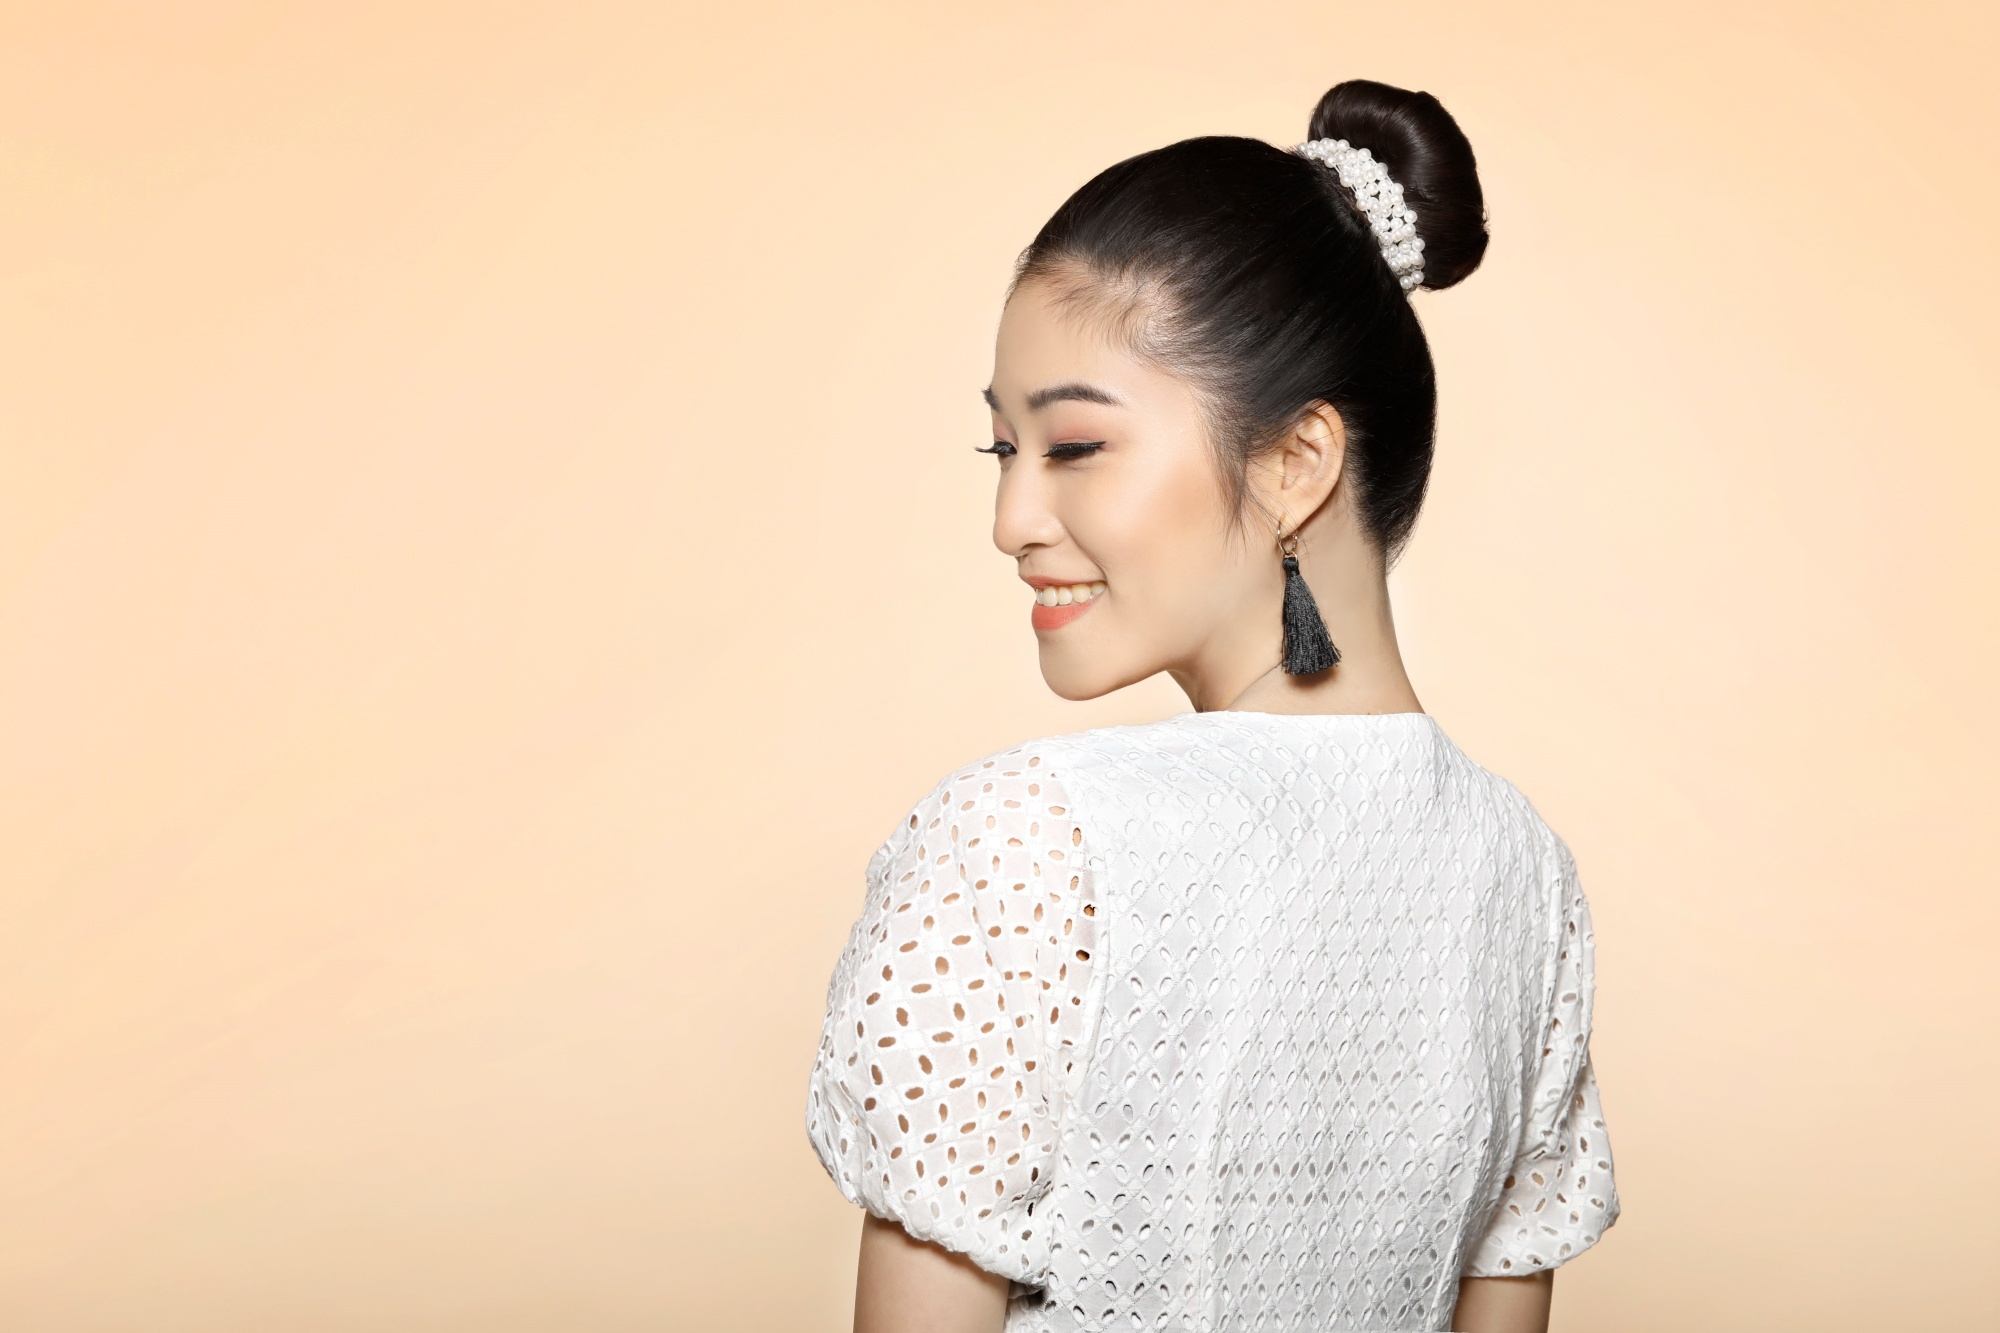 Asian woman with a bun hairstyle